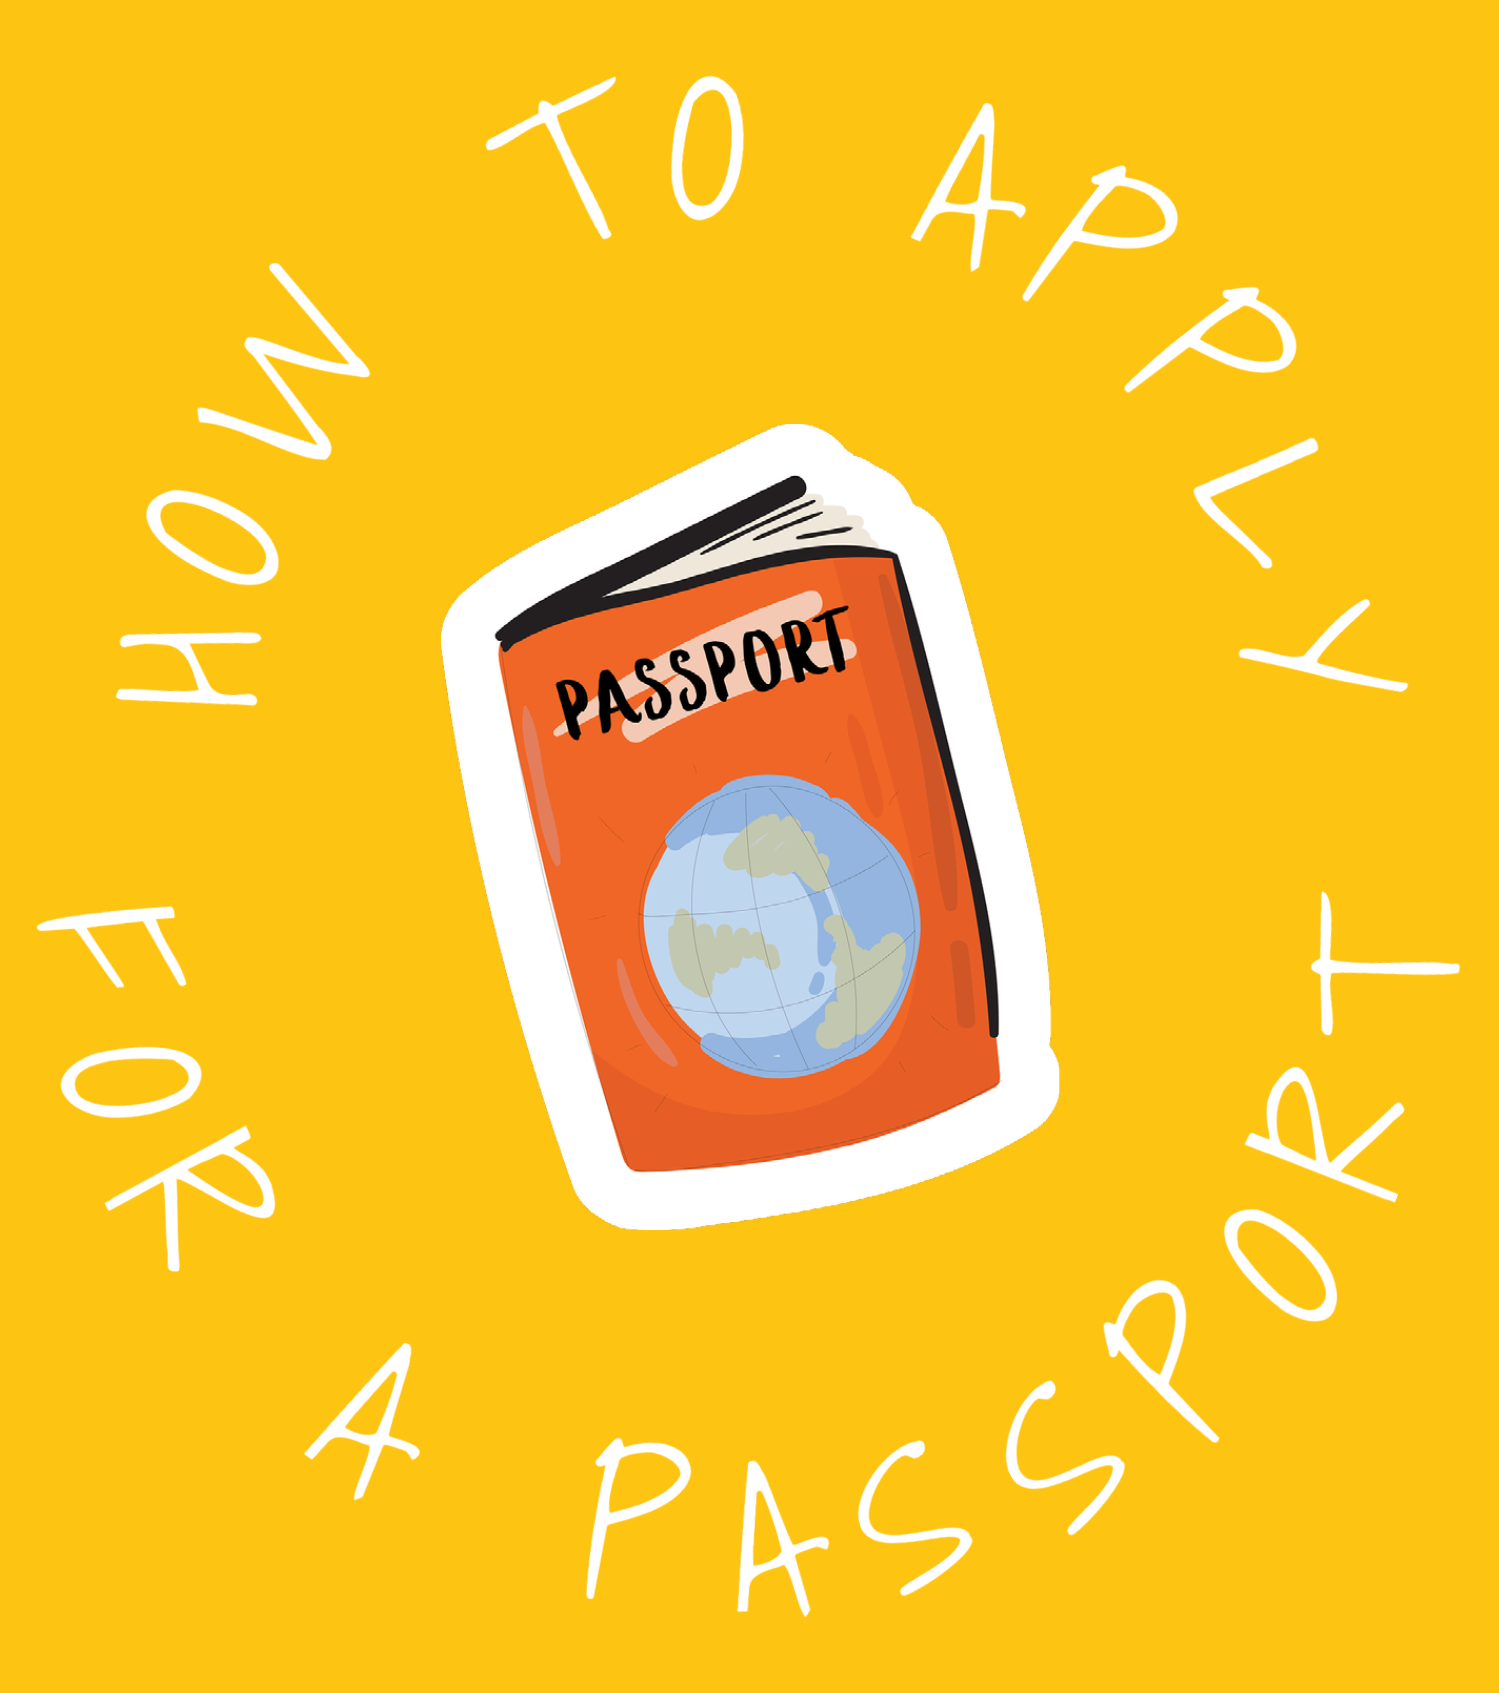 How to Obtain a Passport